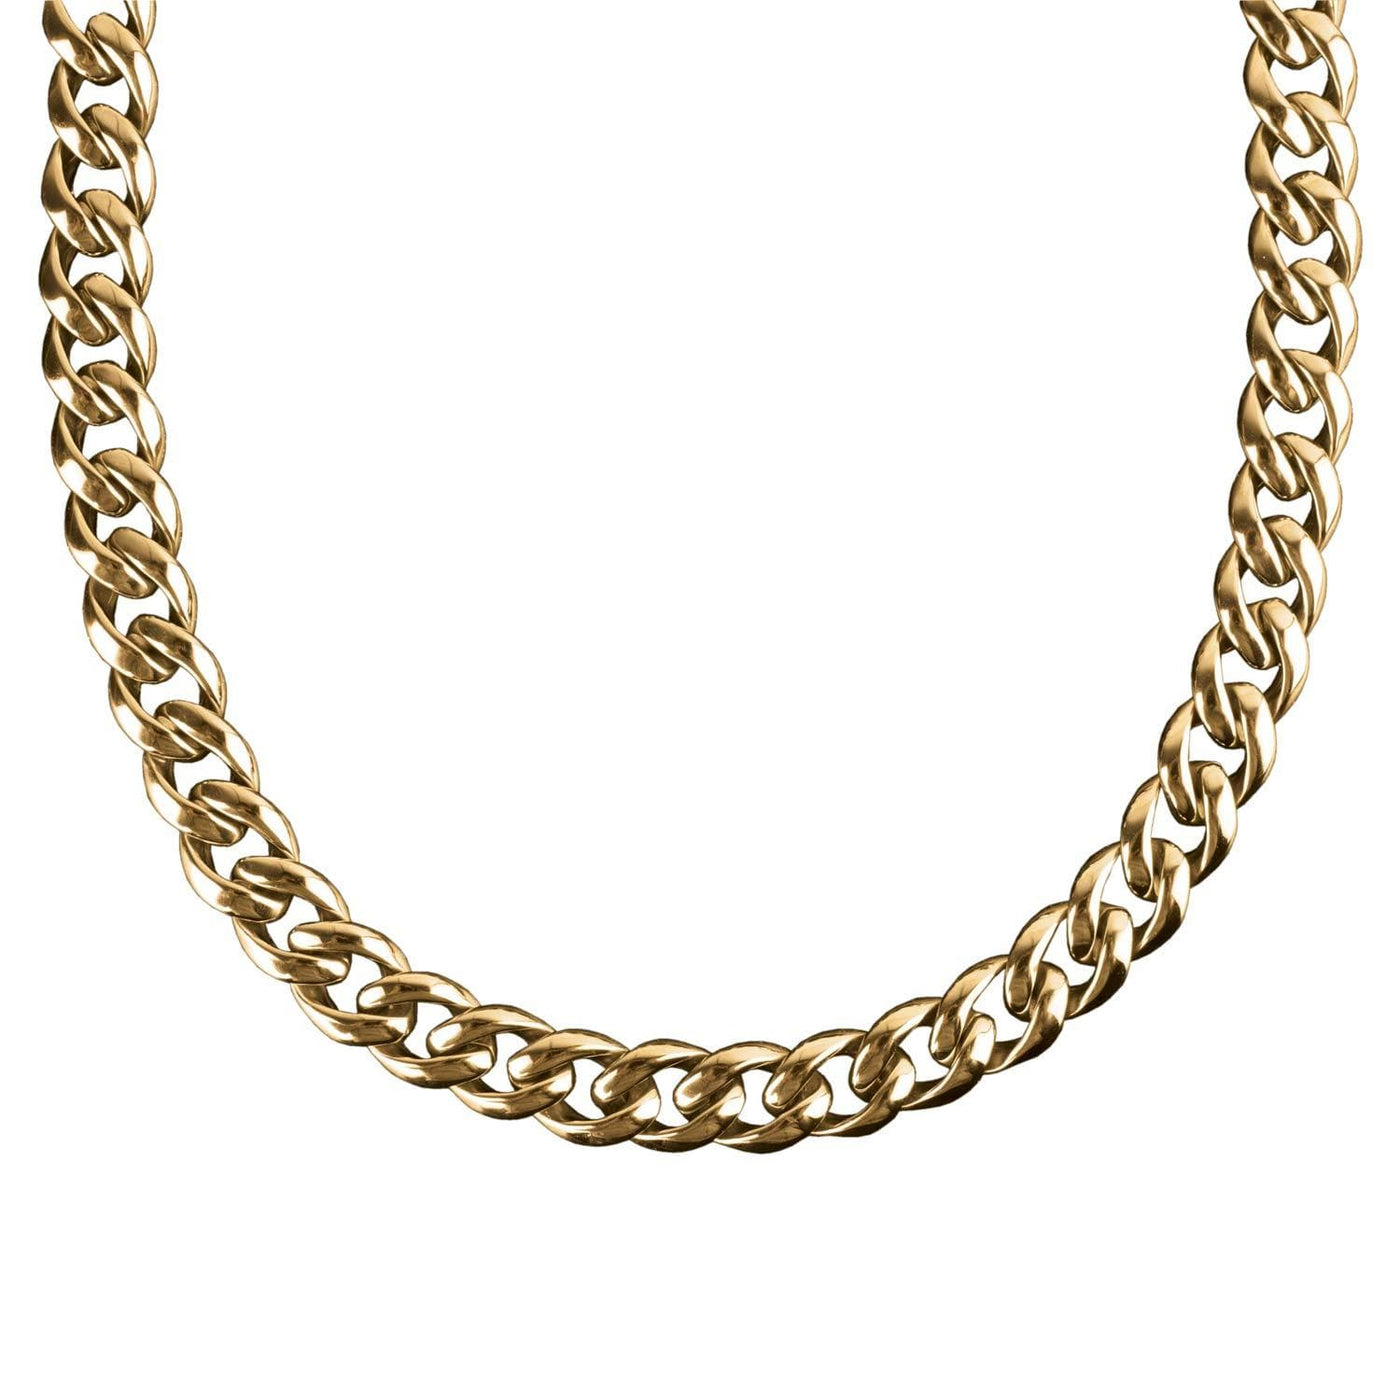 Daniel Steiger Contender Rounded Curb Necklace